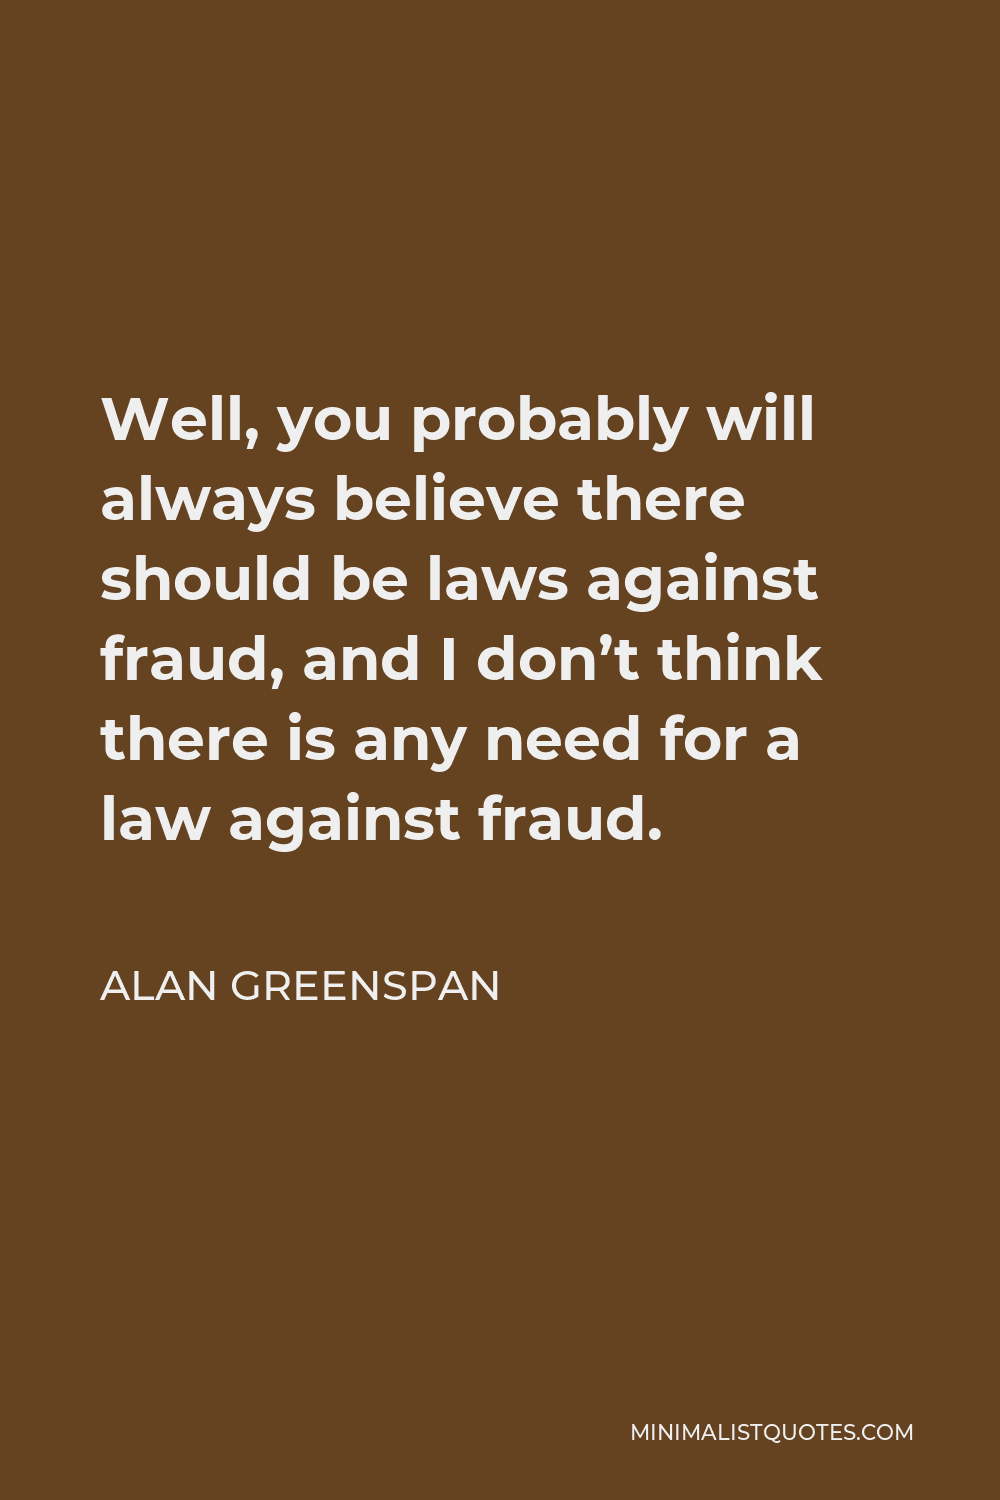 Alan Greenspan Quote - Well, you probably will always believe there should be laws against fraud, and I don’t think there is any need for a law against fraud.